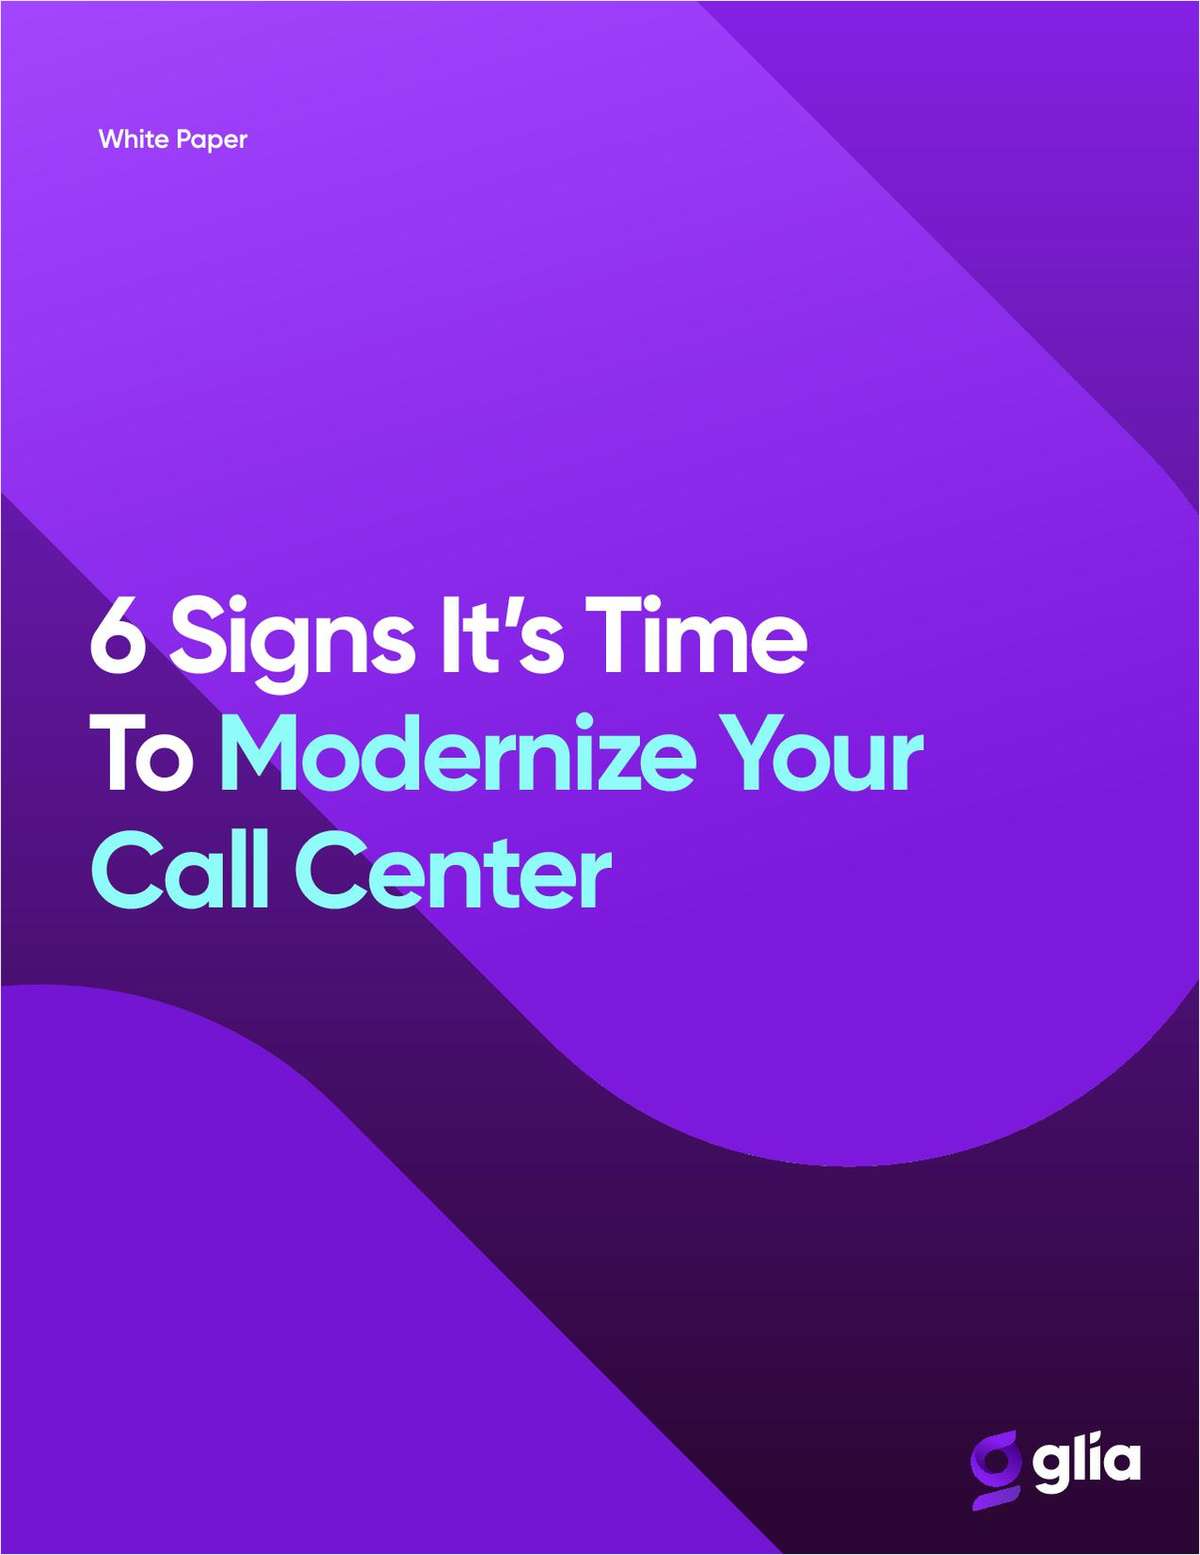 6 Signs It's Time To Modernize Your Call Center link